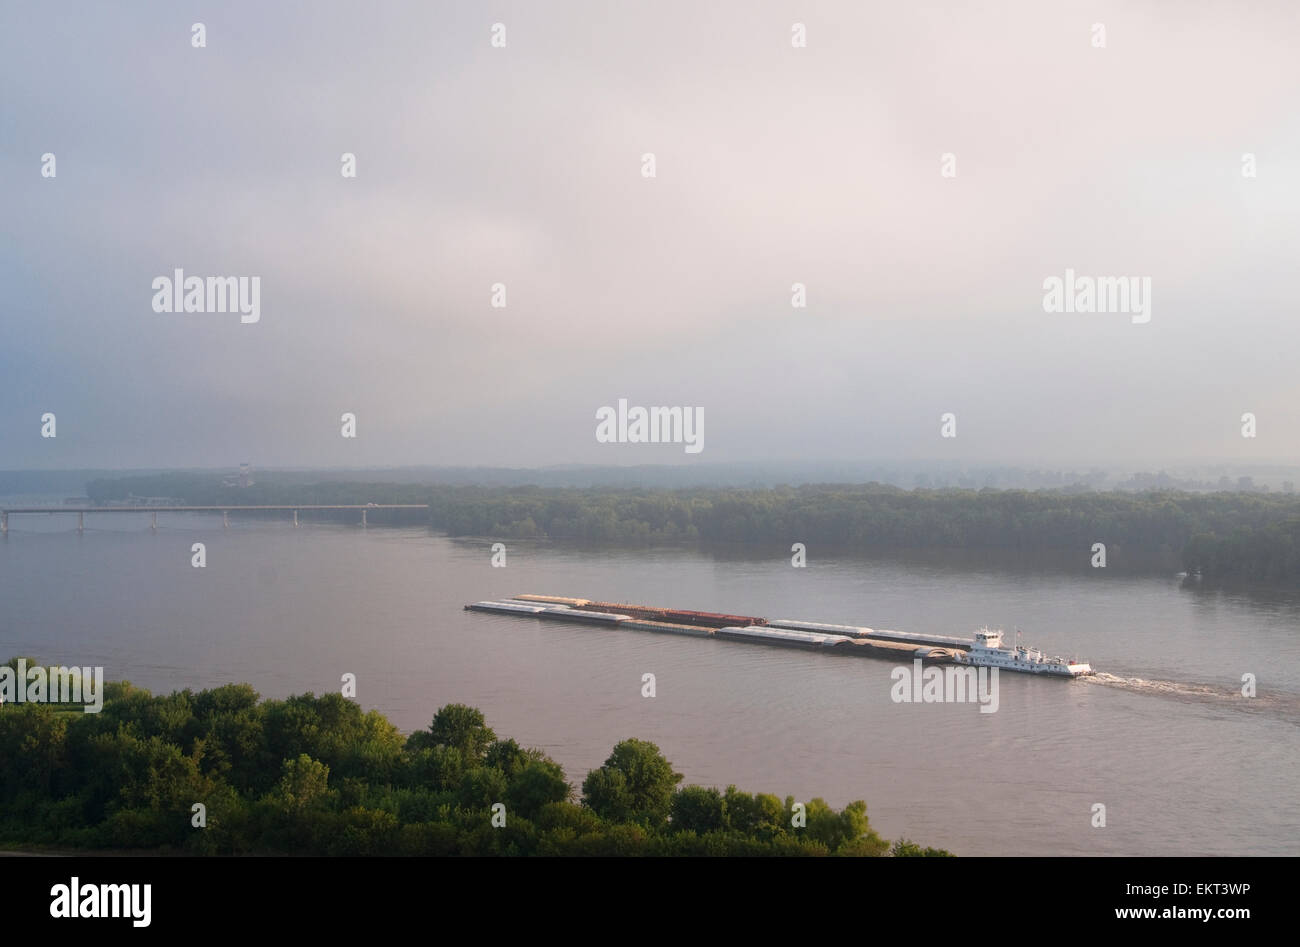 Agriculture - Grain barge navigating the Mississippi River early on an overcast morning / near Hannibal, Missouri, USA. Stock Photo